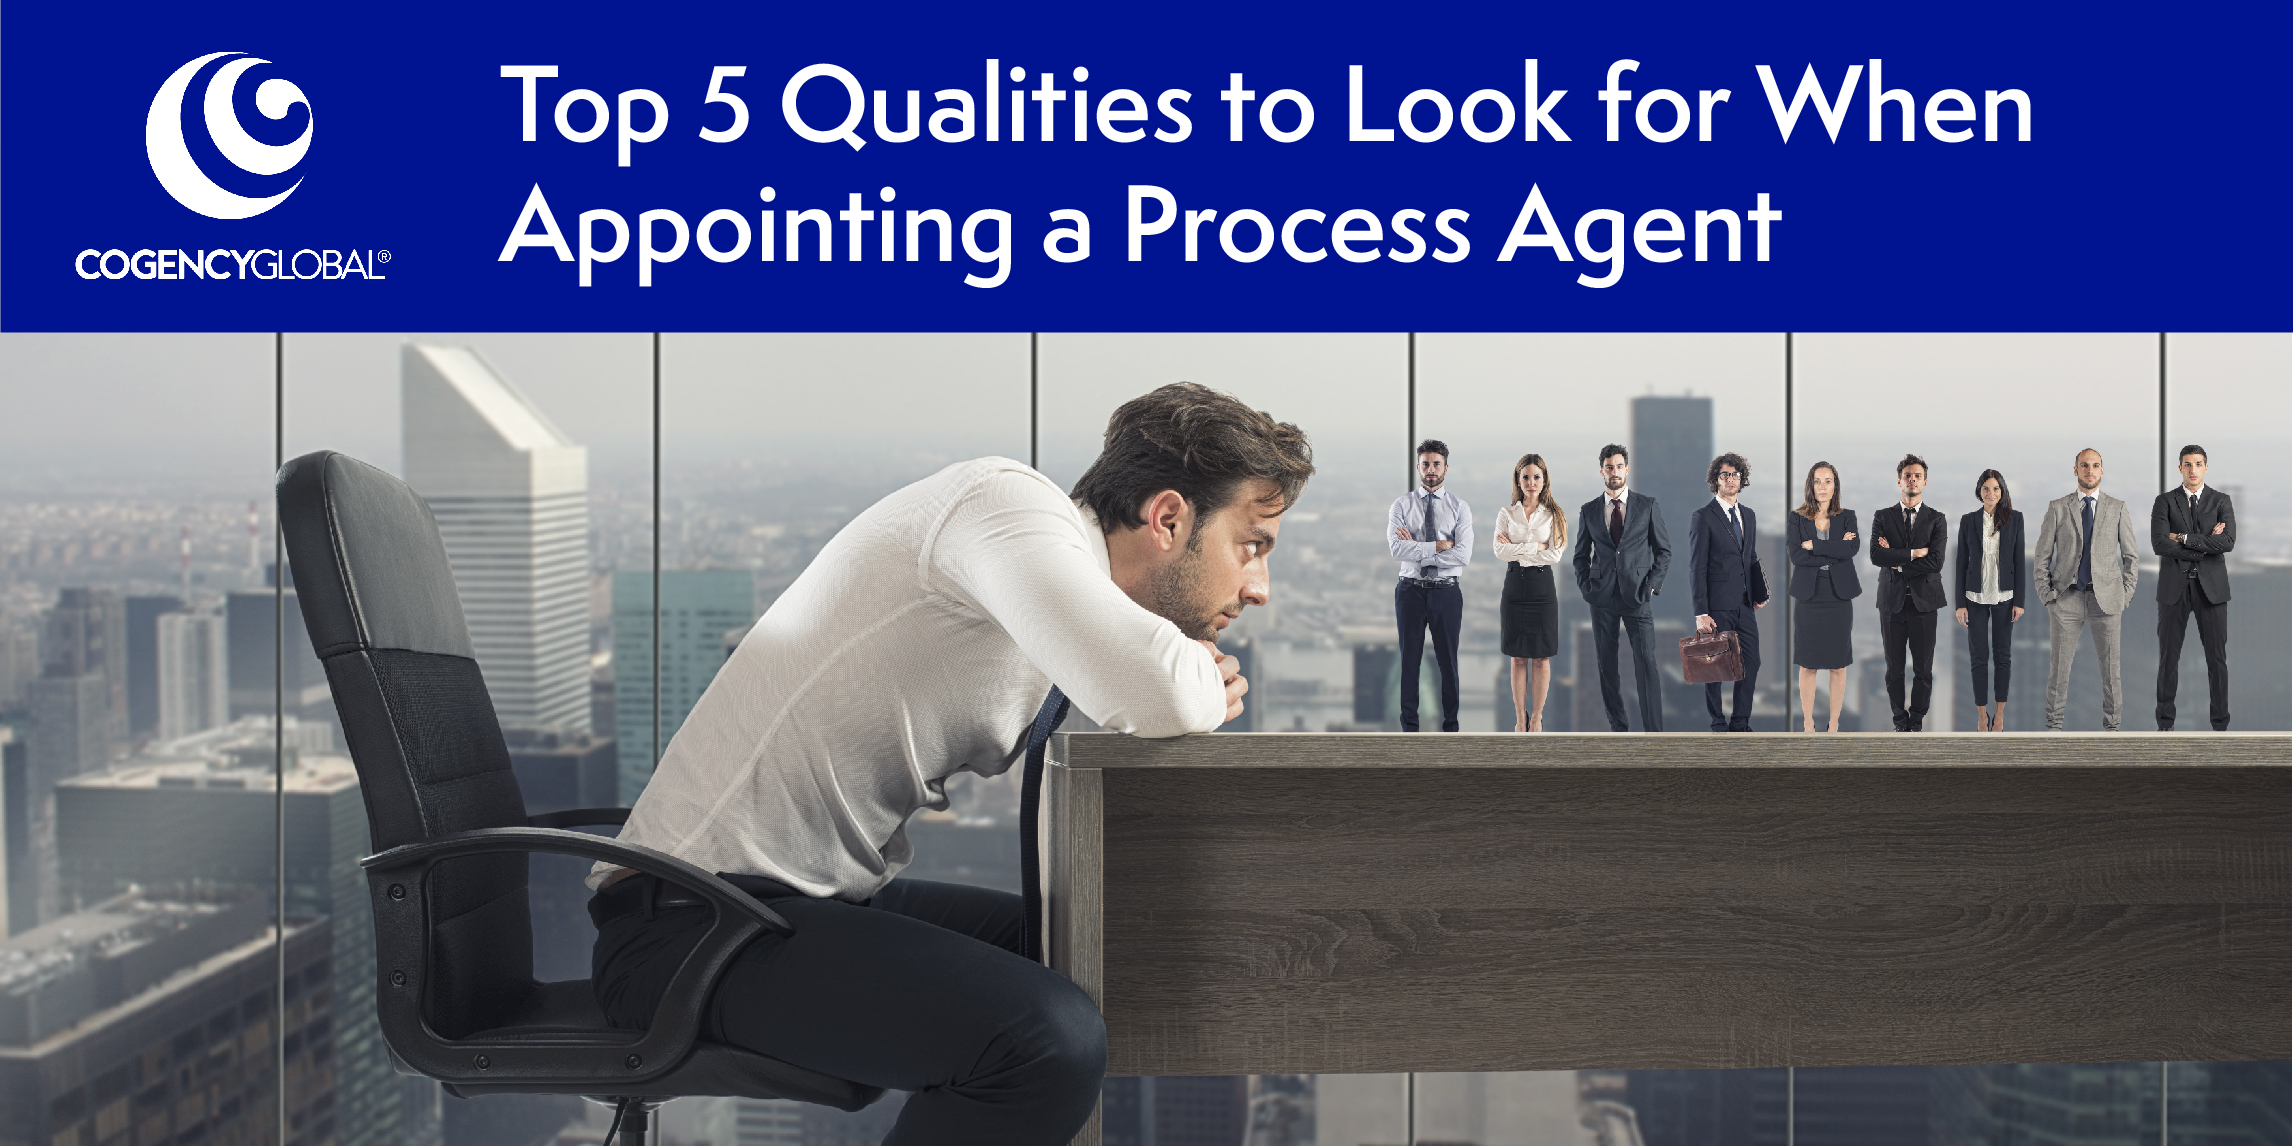 Top 5 Qualities to Look for When Appointing a Process Agent